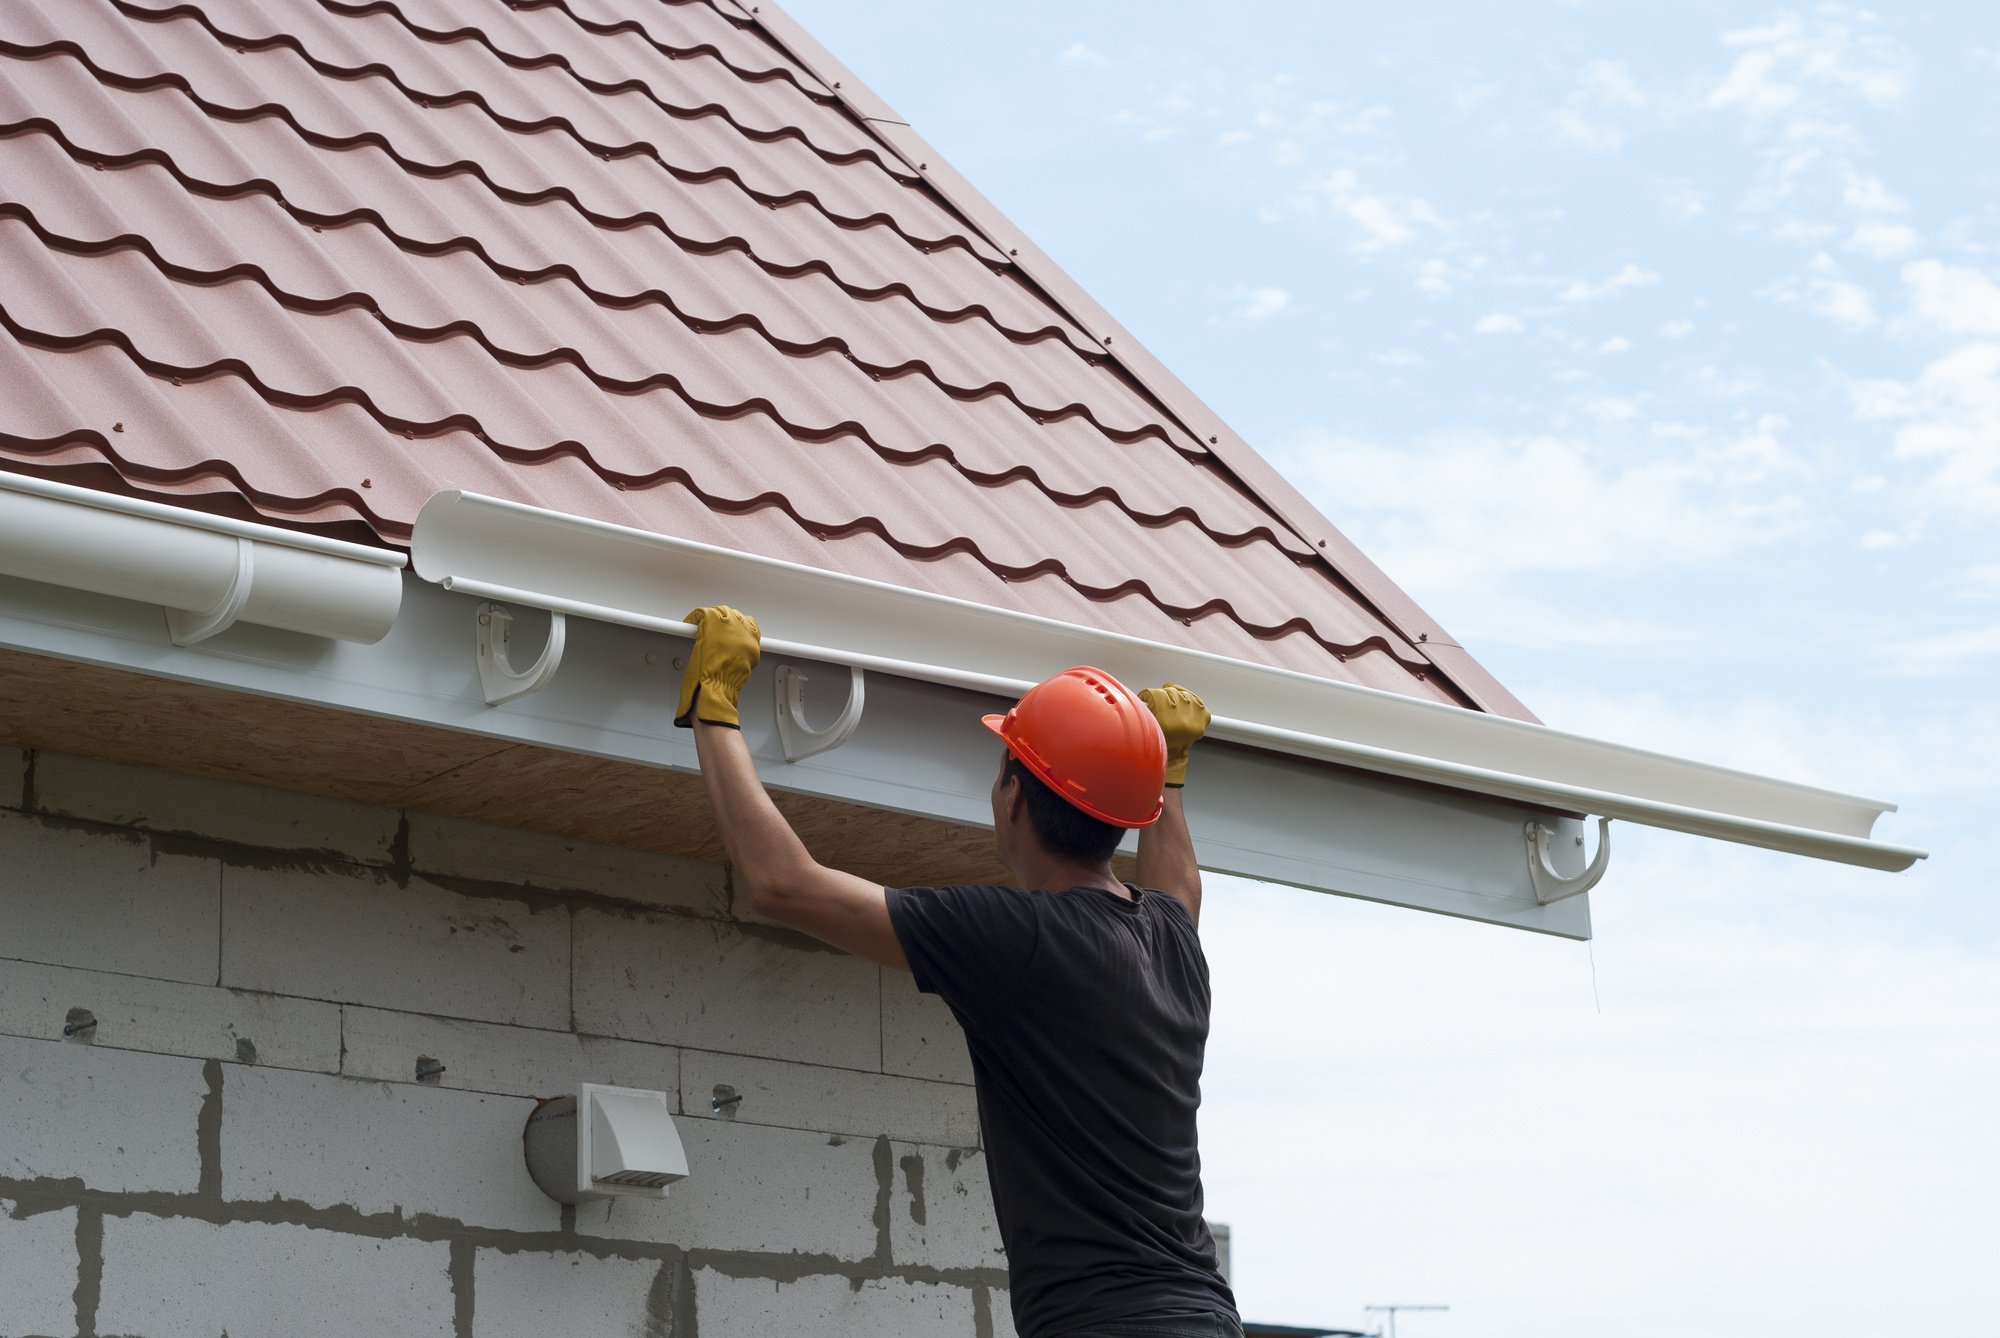 If you need new gutters, don't install them yourself. Click here to read four benefits of professional gutter installation services.